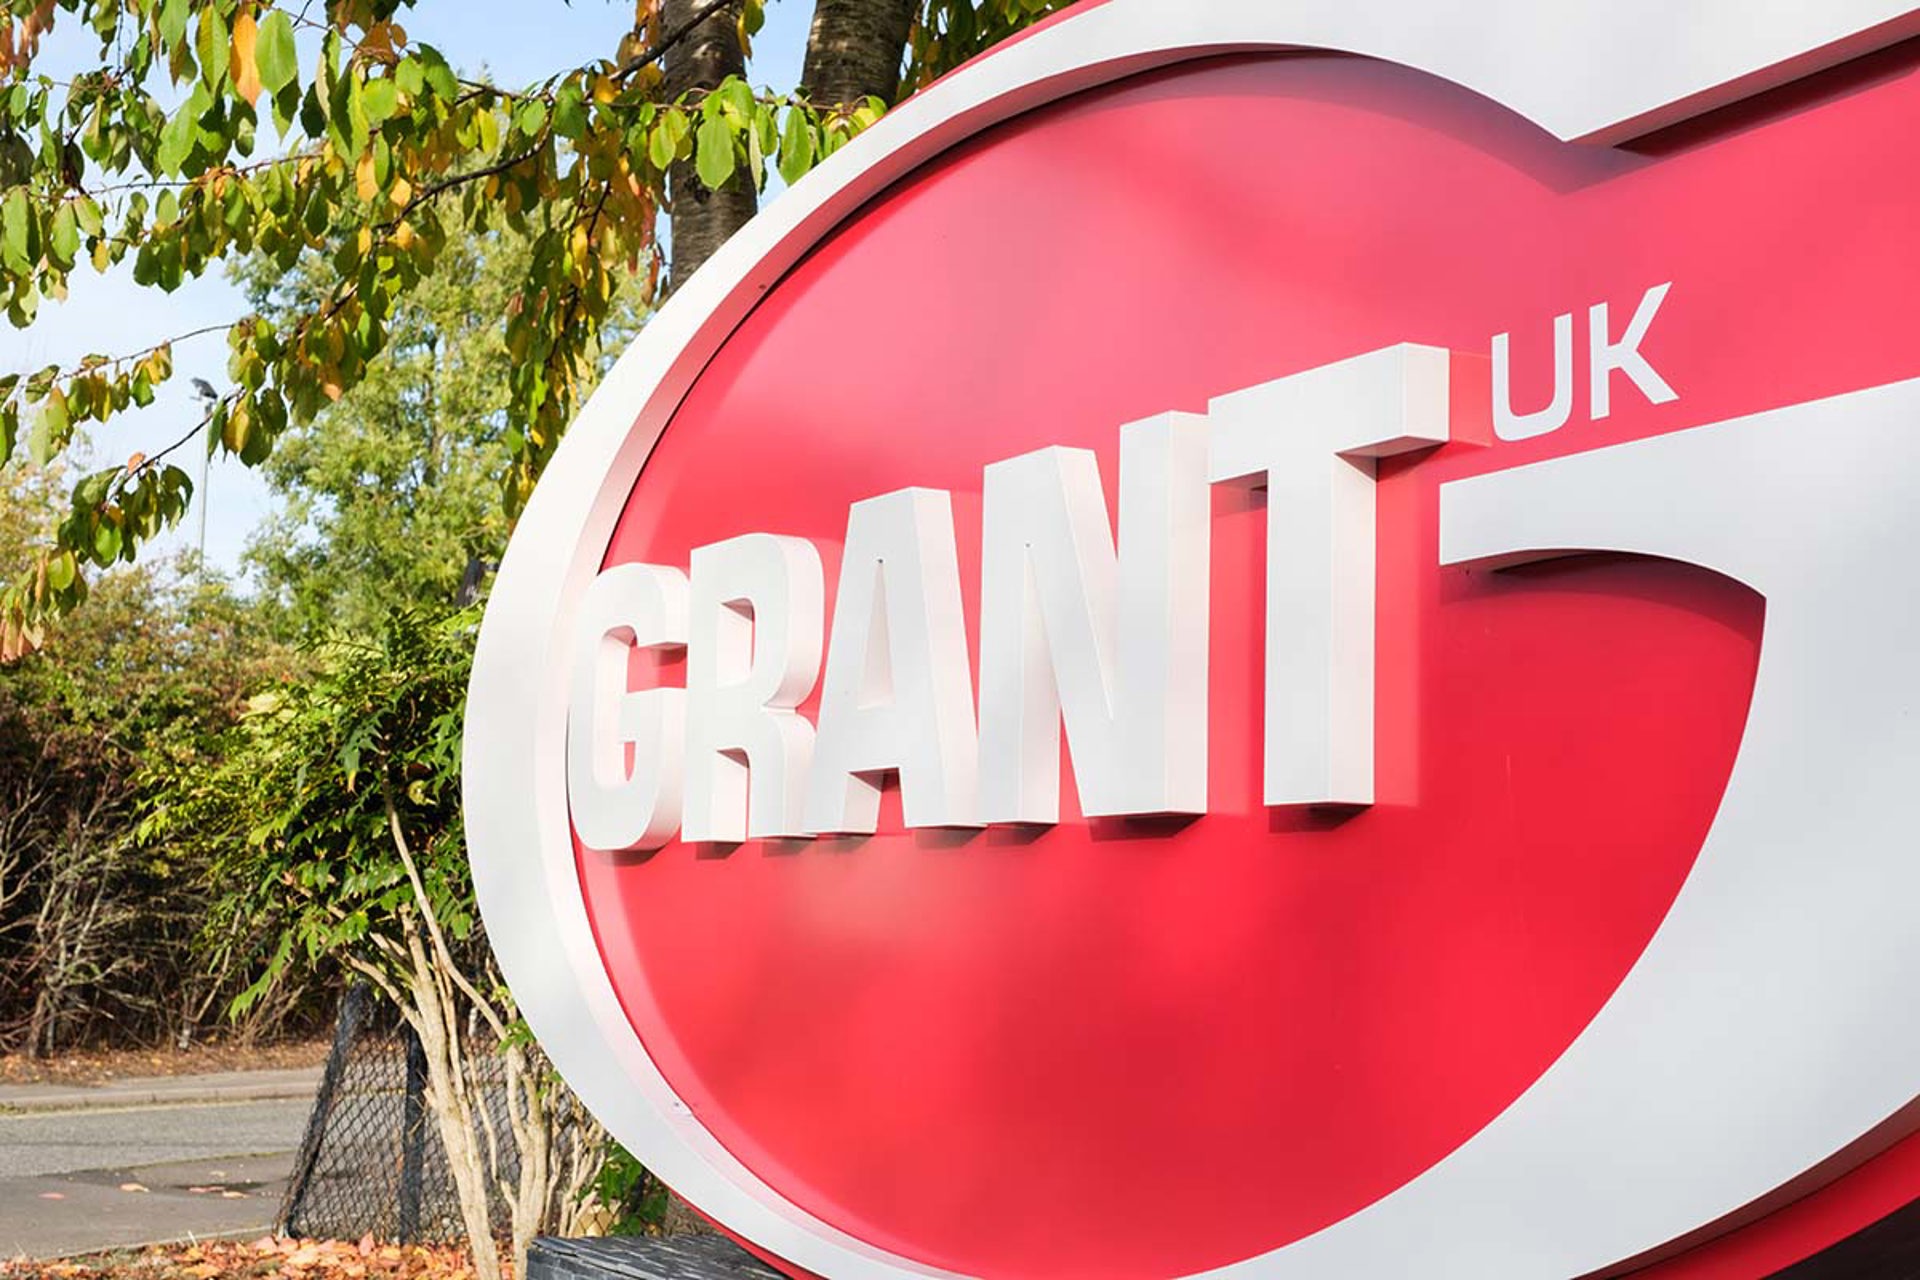 A red and white logo for Grant UK